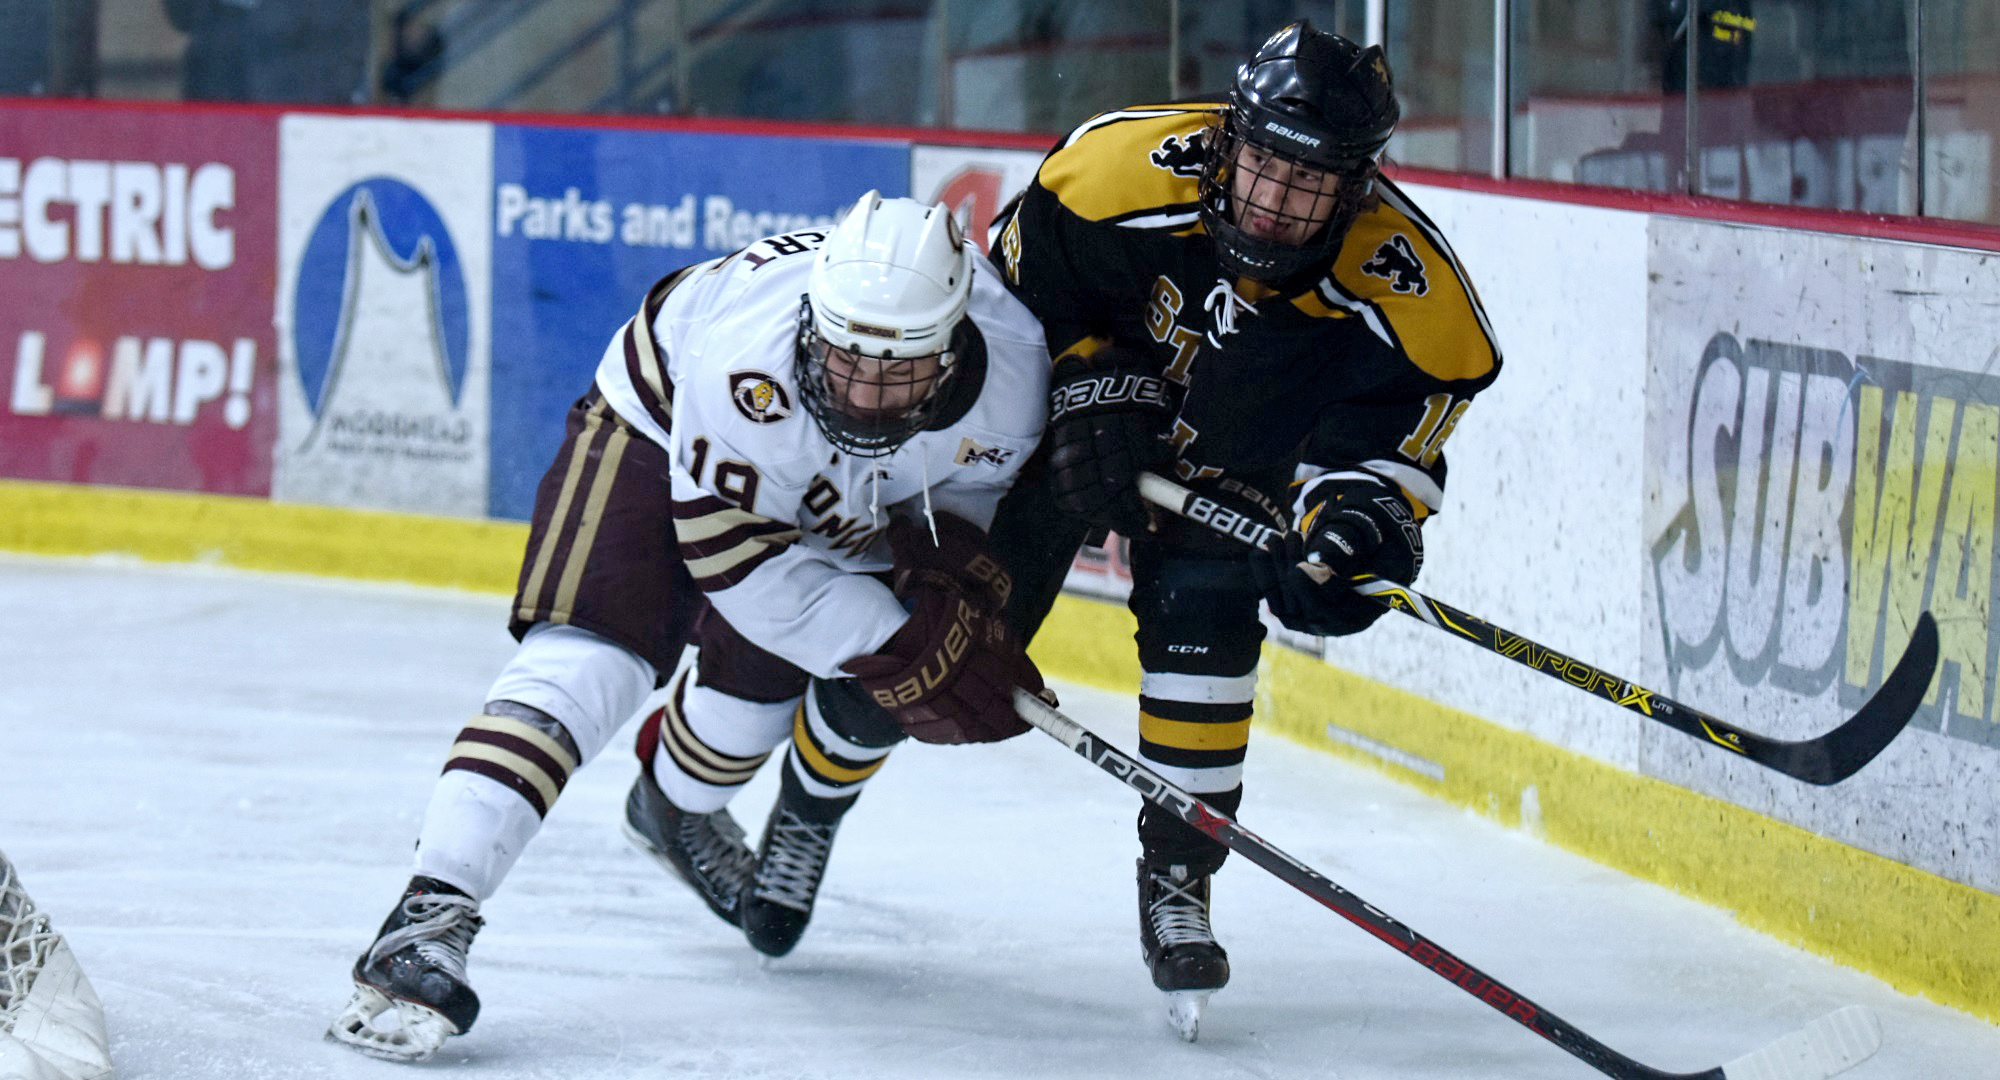 Sophomore Tyler Bossert tangles with one of the St. Olaf players during the Cobbers' 4-2 win. Bossert had a goal and two assists to help CC to the series sweep.